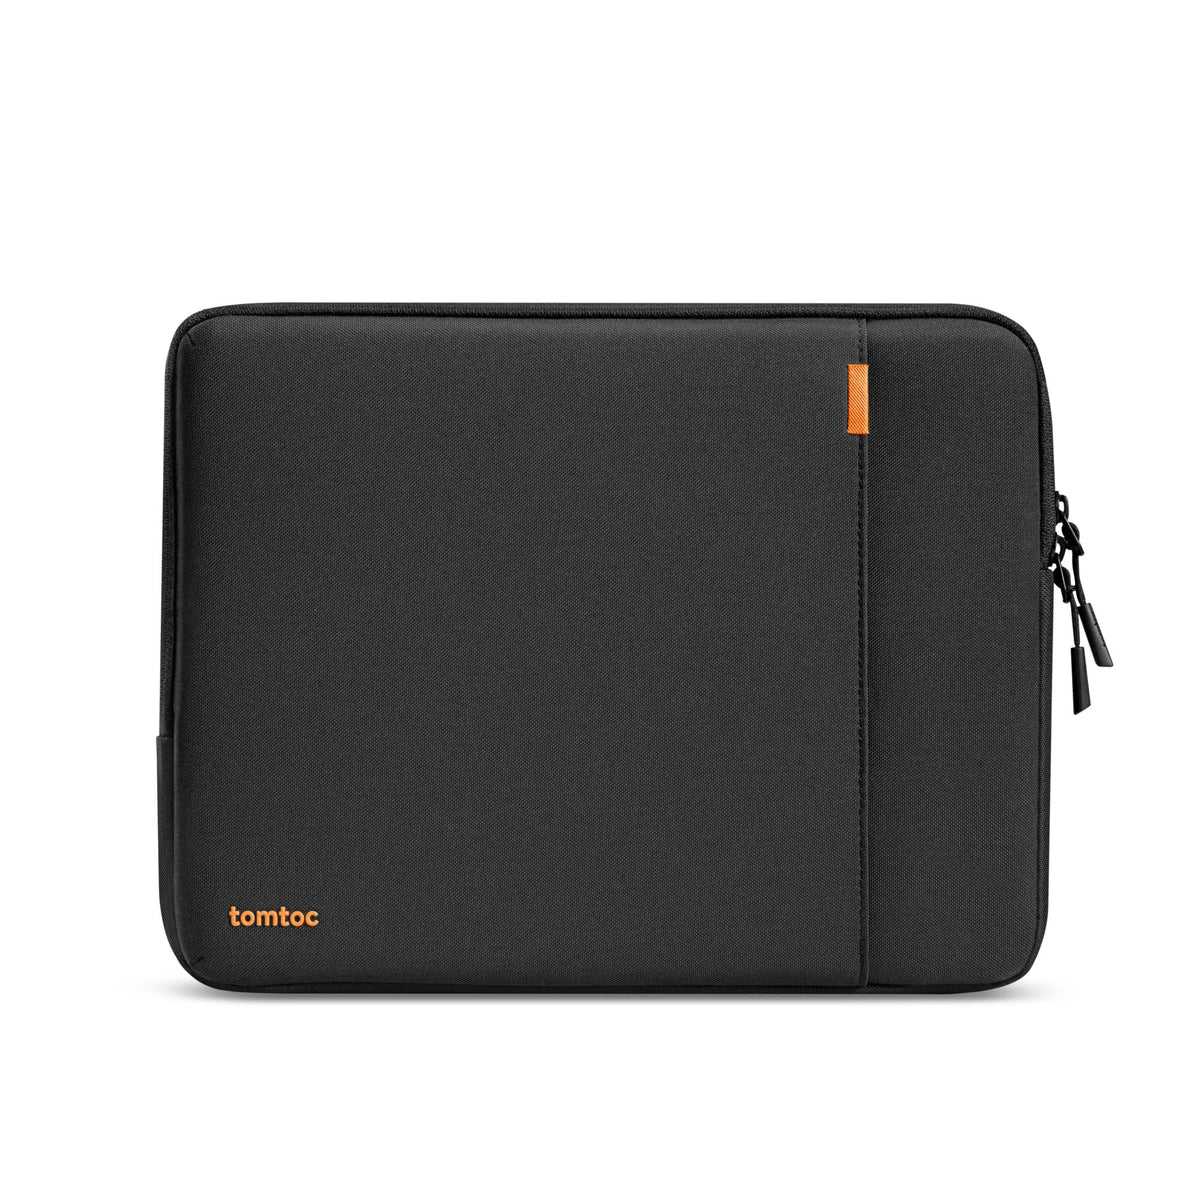 Defender-B13 Tablet Sleeve for 11-inch iPad Pro